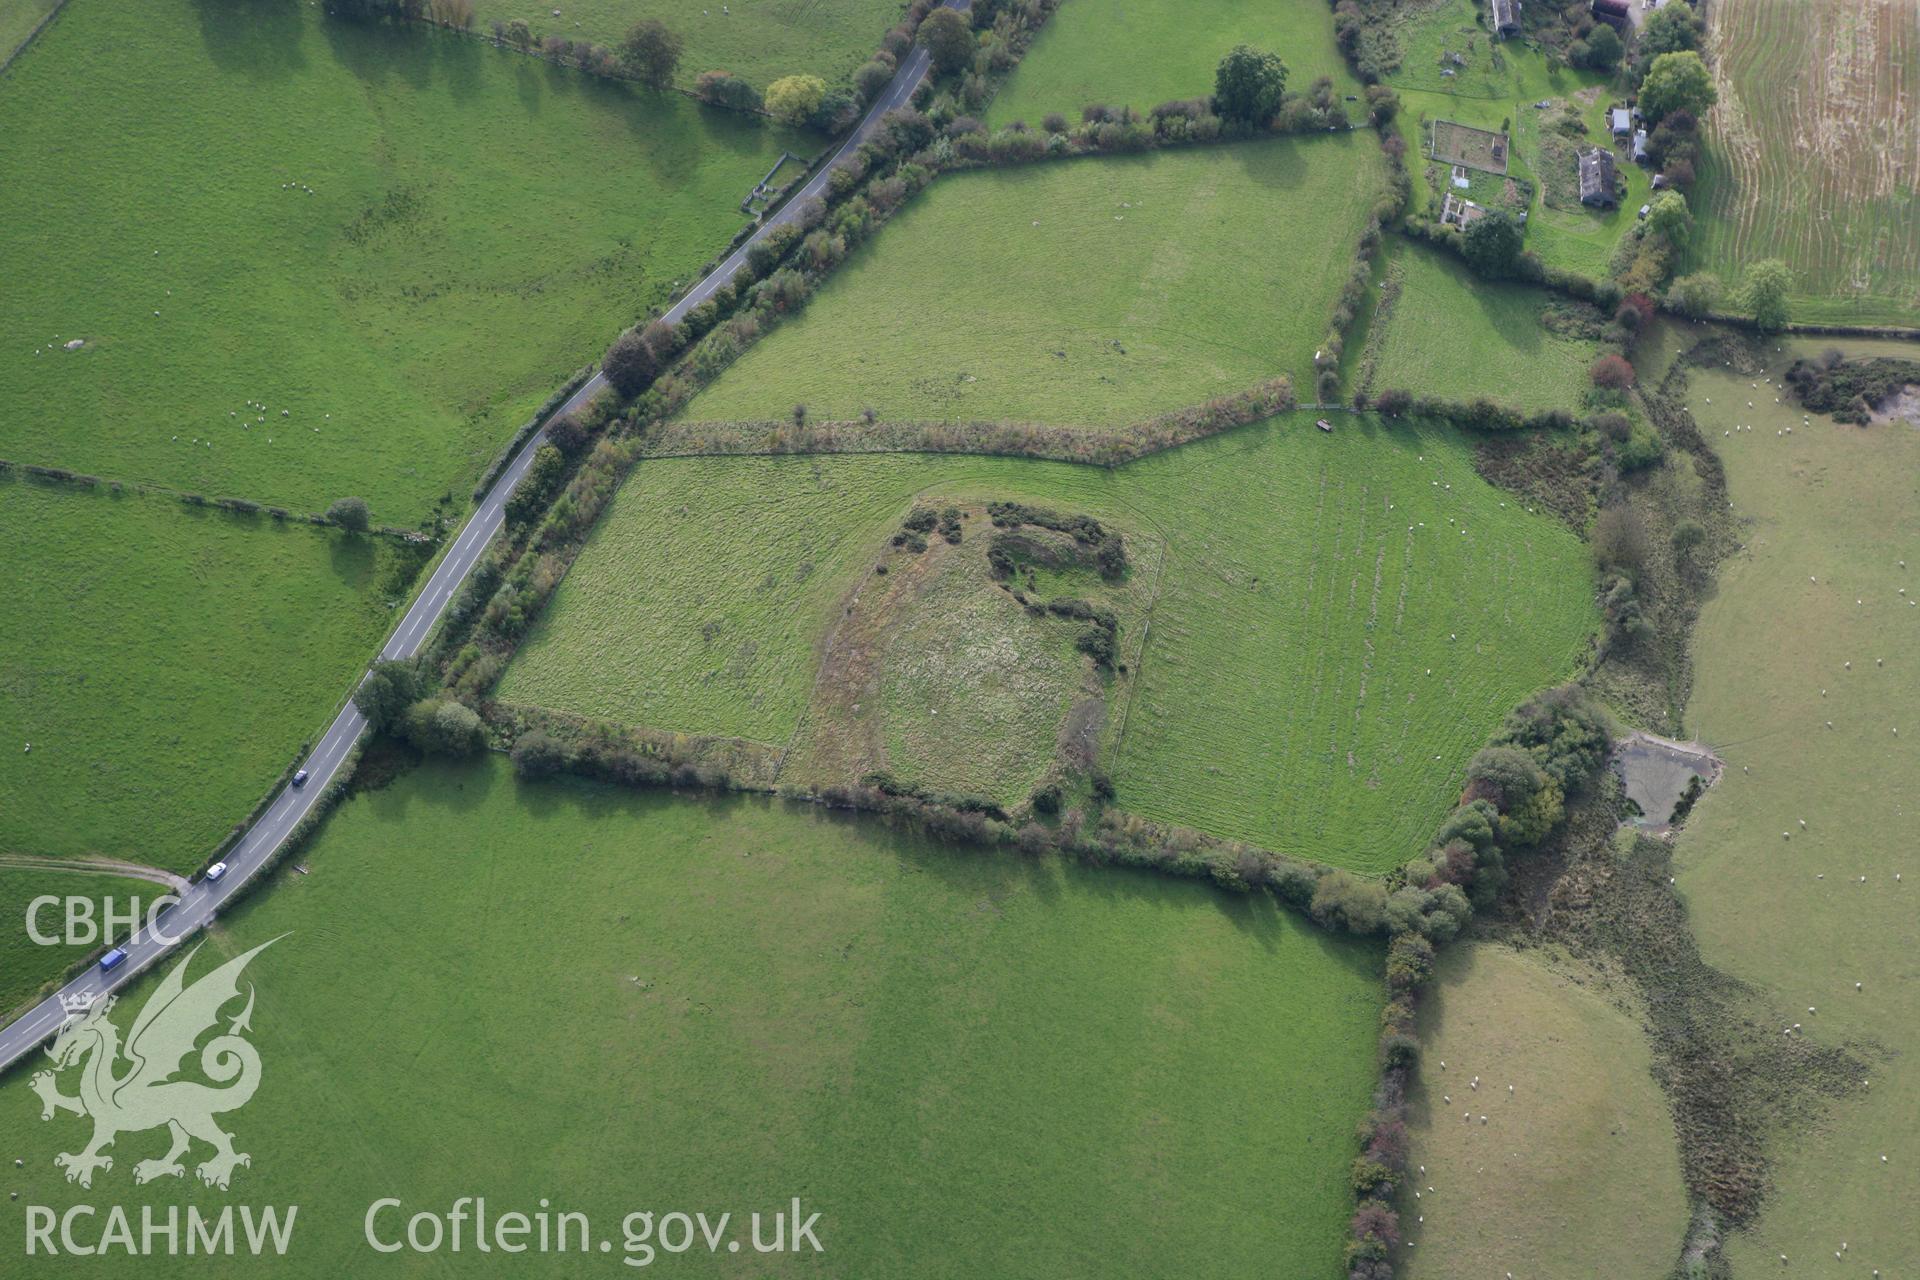 RCAHMW colour oblique aerial photograph of Moel Fodig Defended Enclosure. Taken on 13 October 2009 by Toby Driver